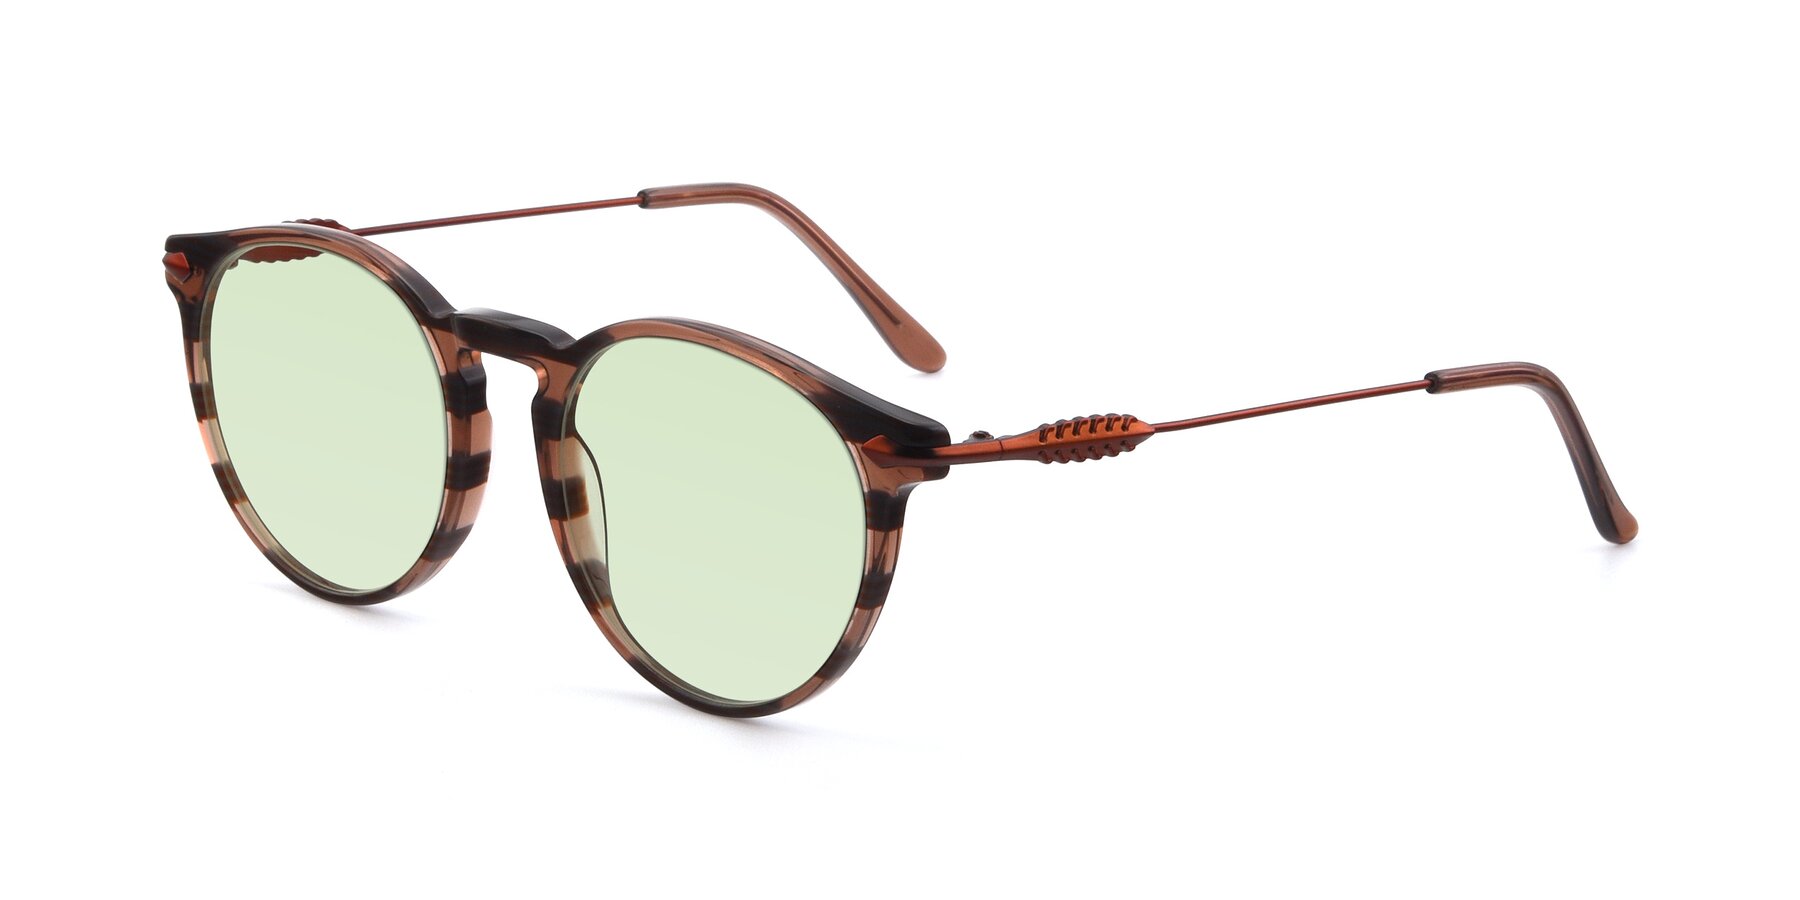 Angle of 17660 in Stripe Brown with Light Green Tinted Lenses